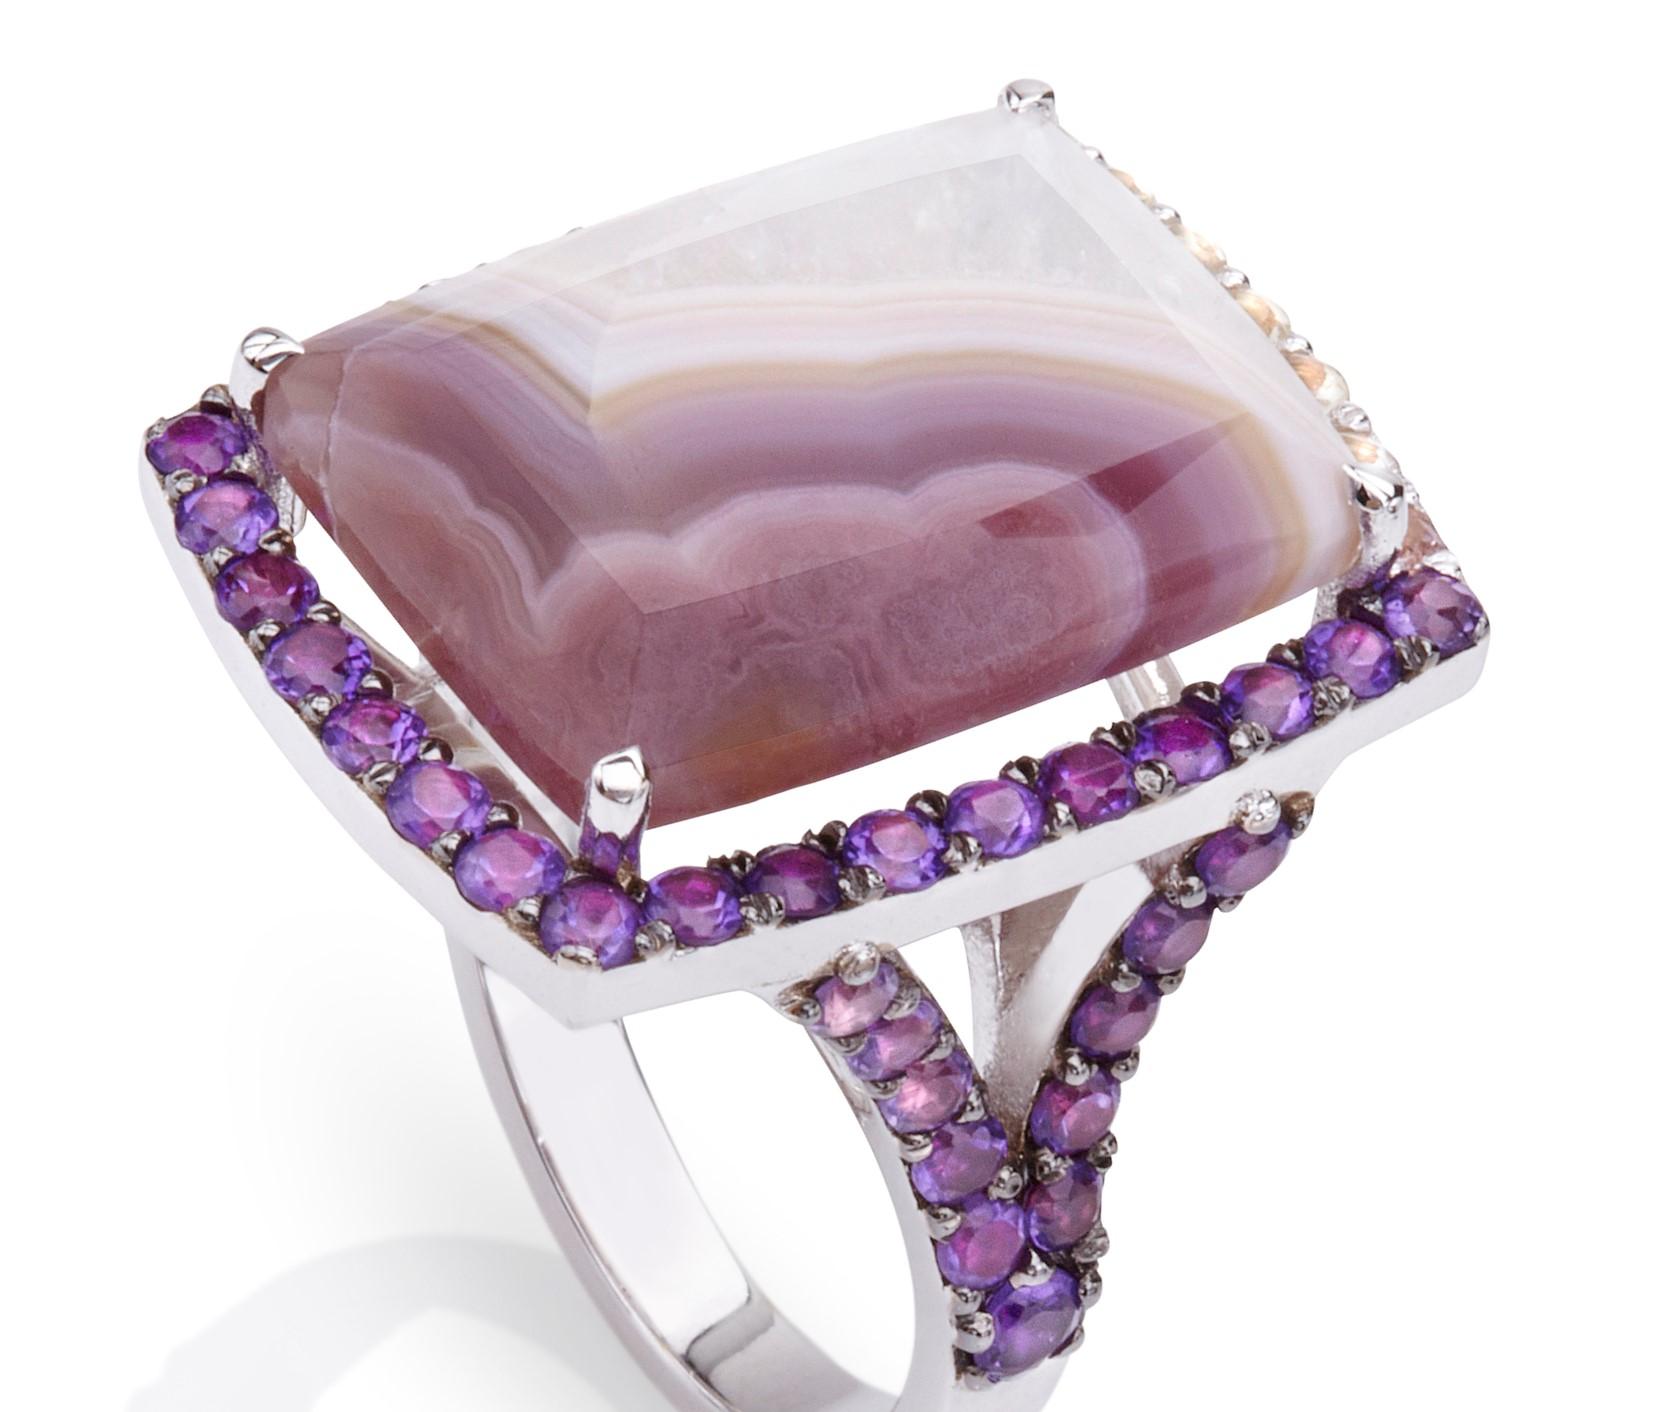 Cushion Cut Agate 18Kt White Gold Ring Set with Agate Amethyst and Tourmaline One of a Kind